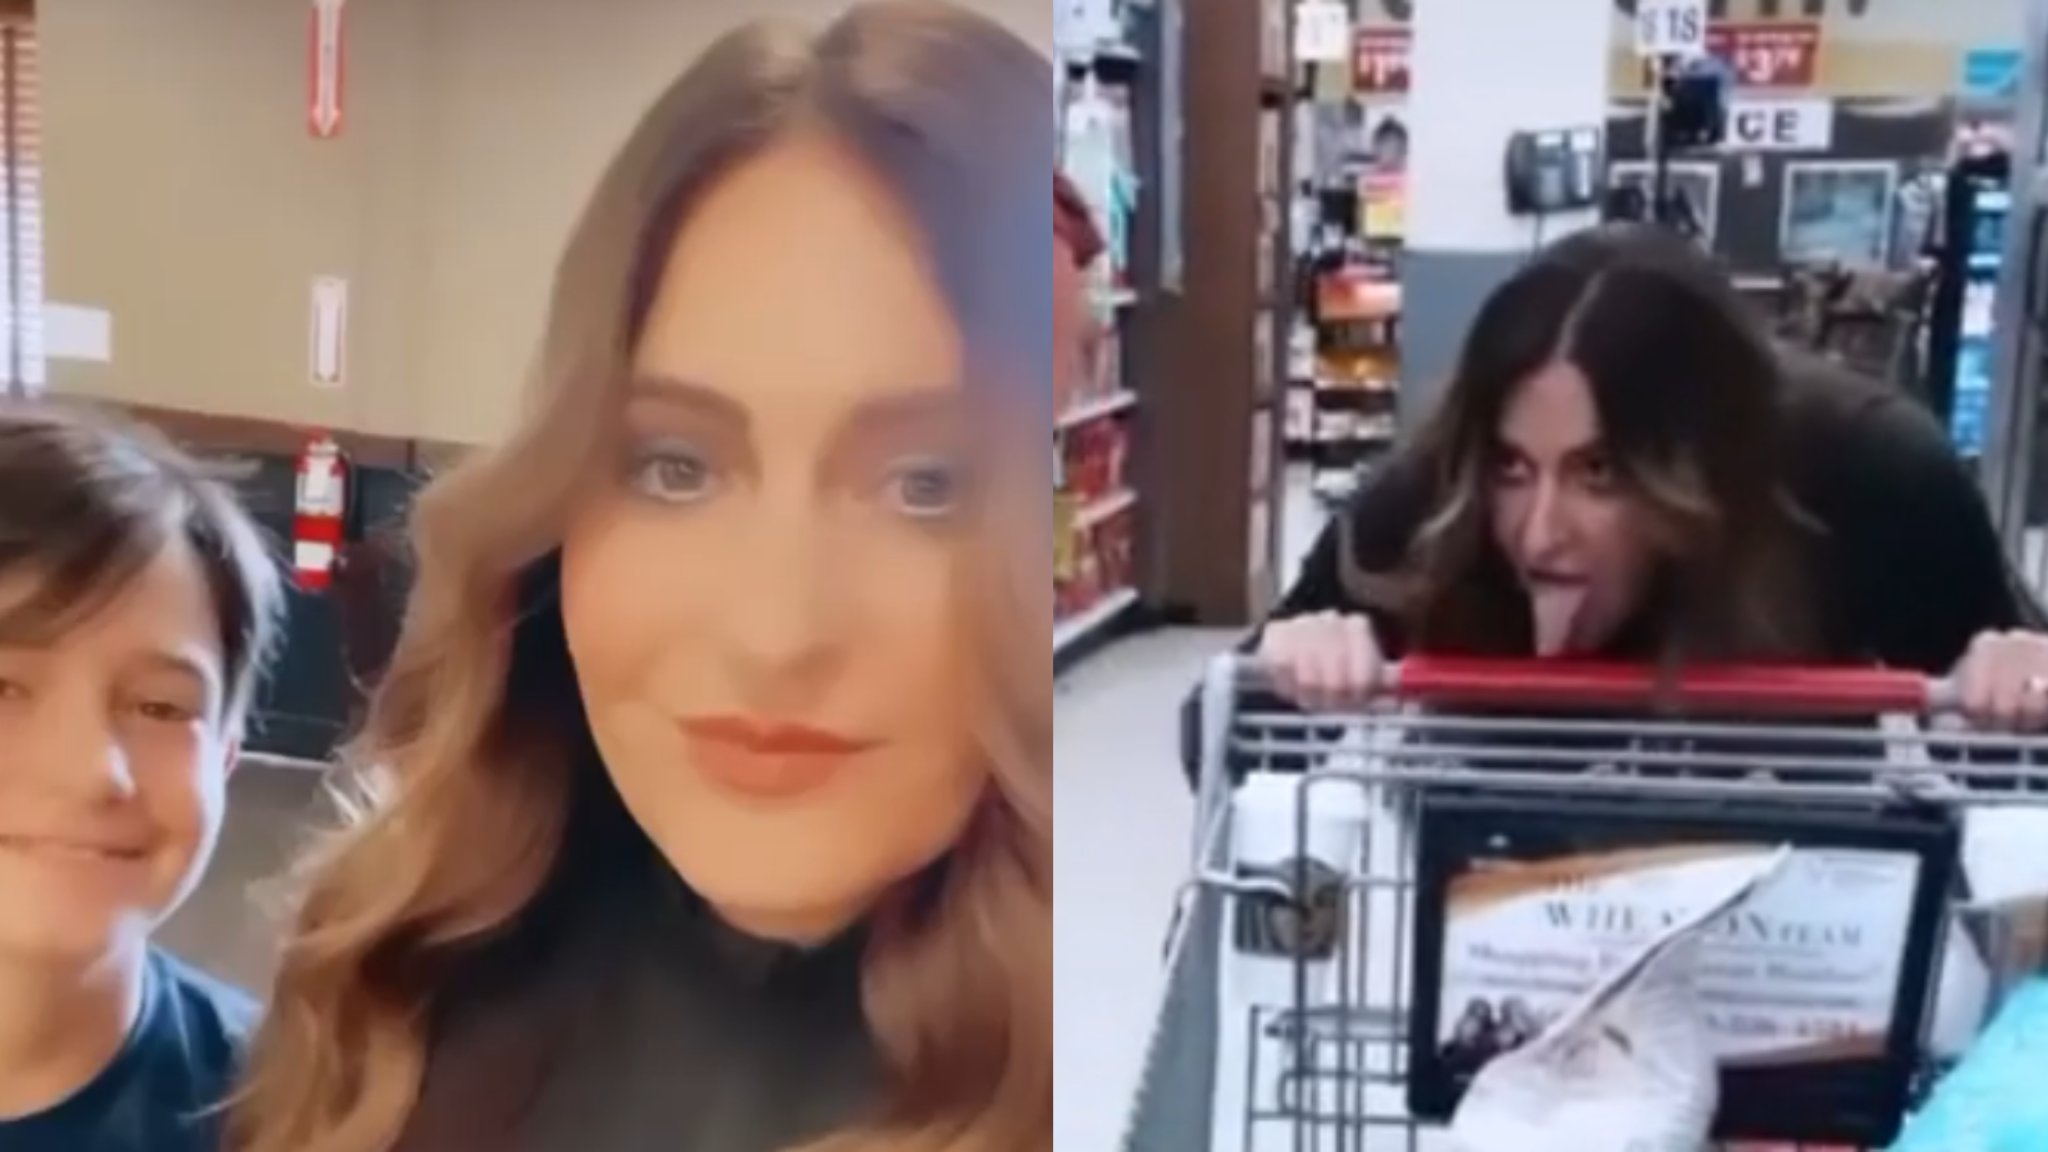 Anti-Masker Mom of 2 Proudly Films Herself Licking Everything Throughout Her Grocery Store